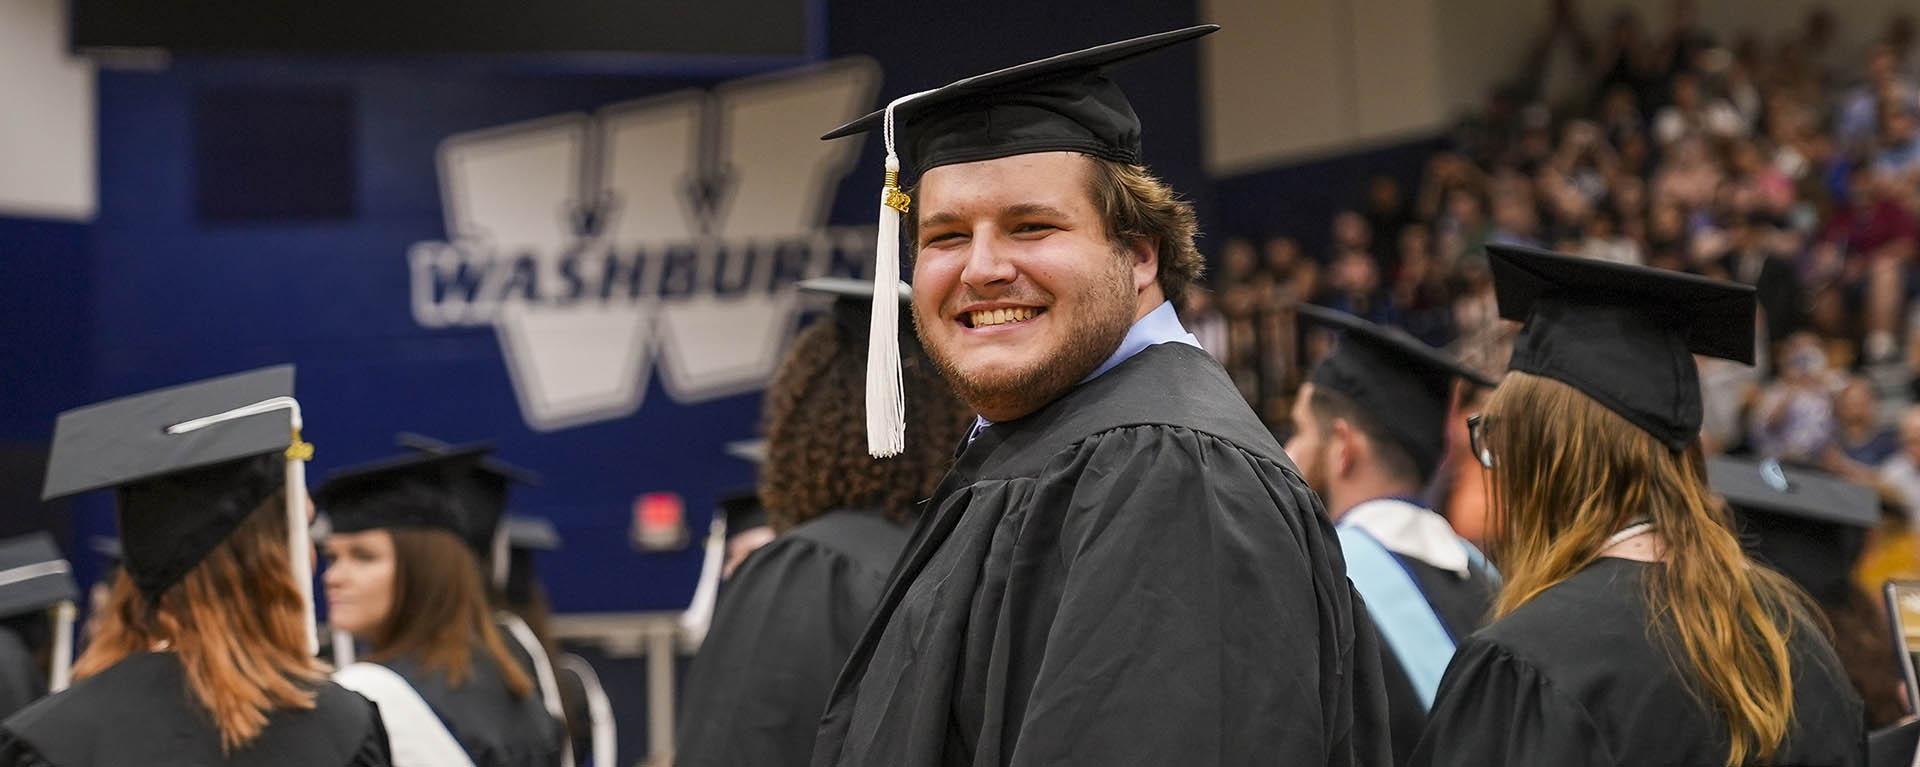 A student smiles widely for a photo in graduation regalia with a Washburn logo in the distance behind him.